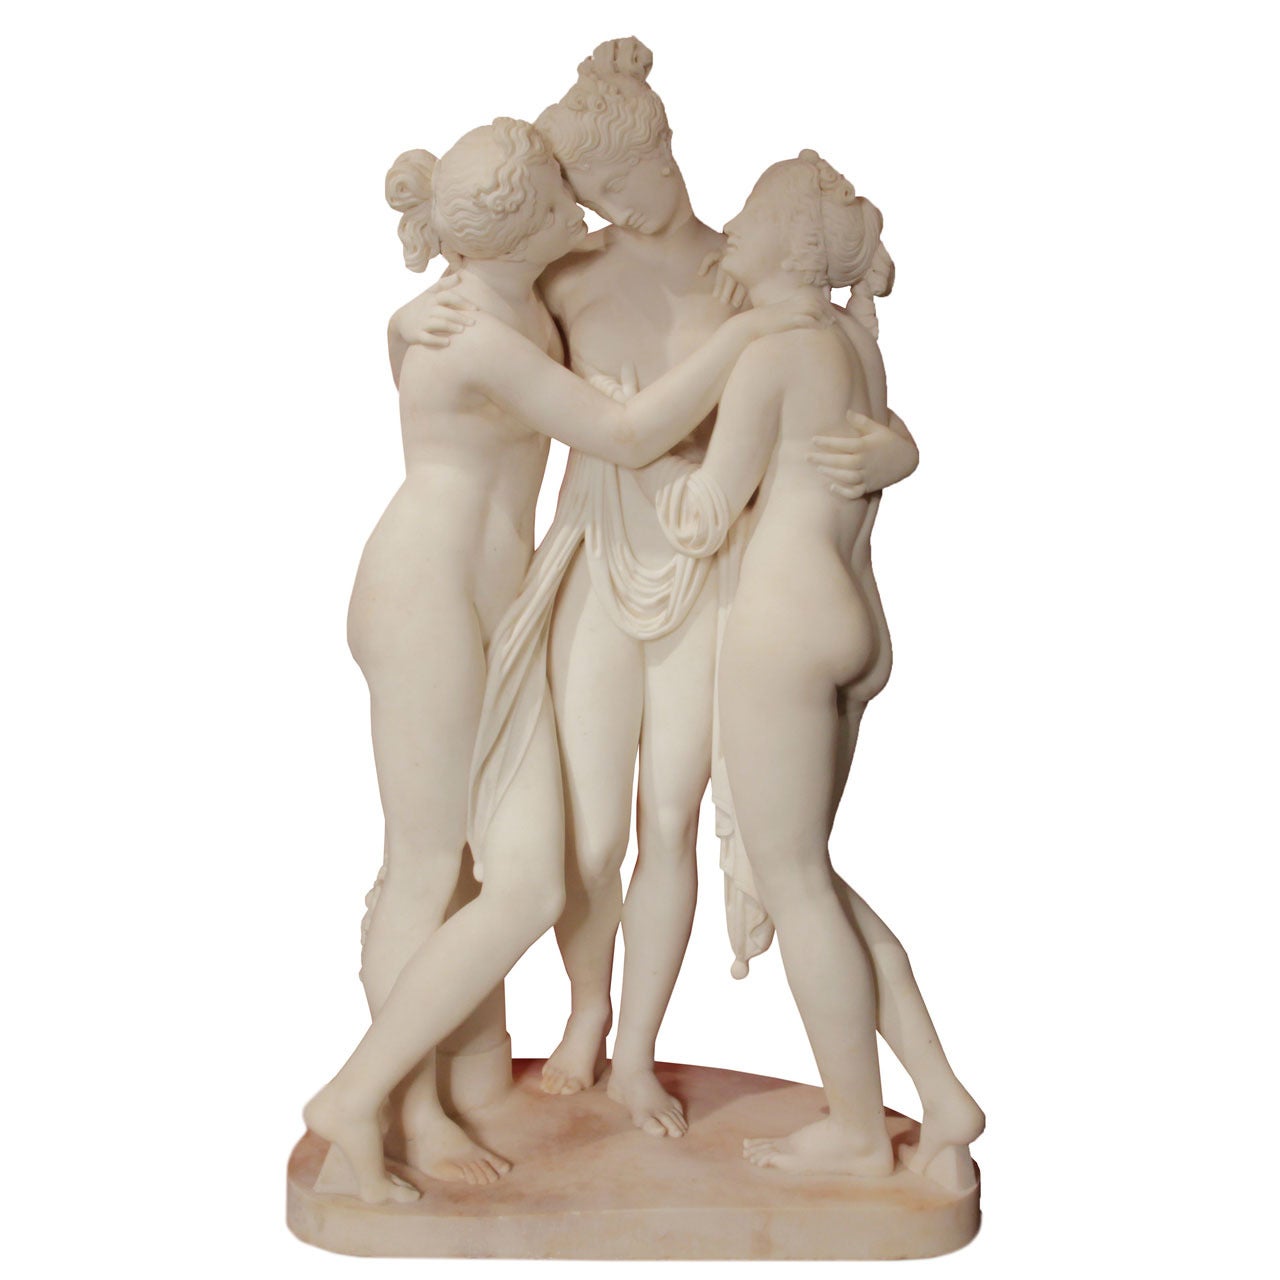 Very Fine Sculpture of The Three Graces